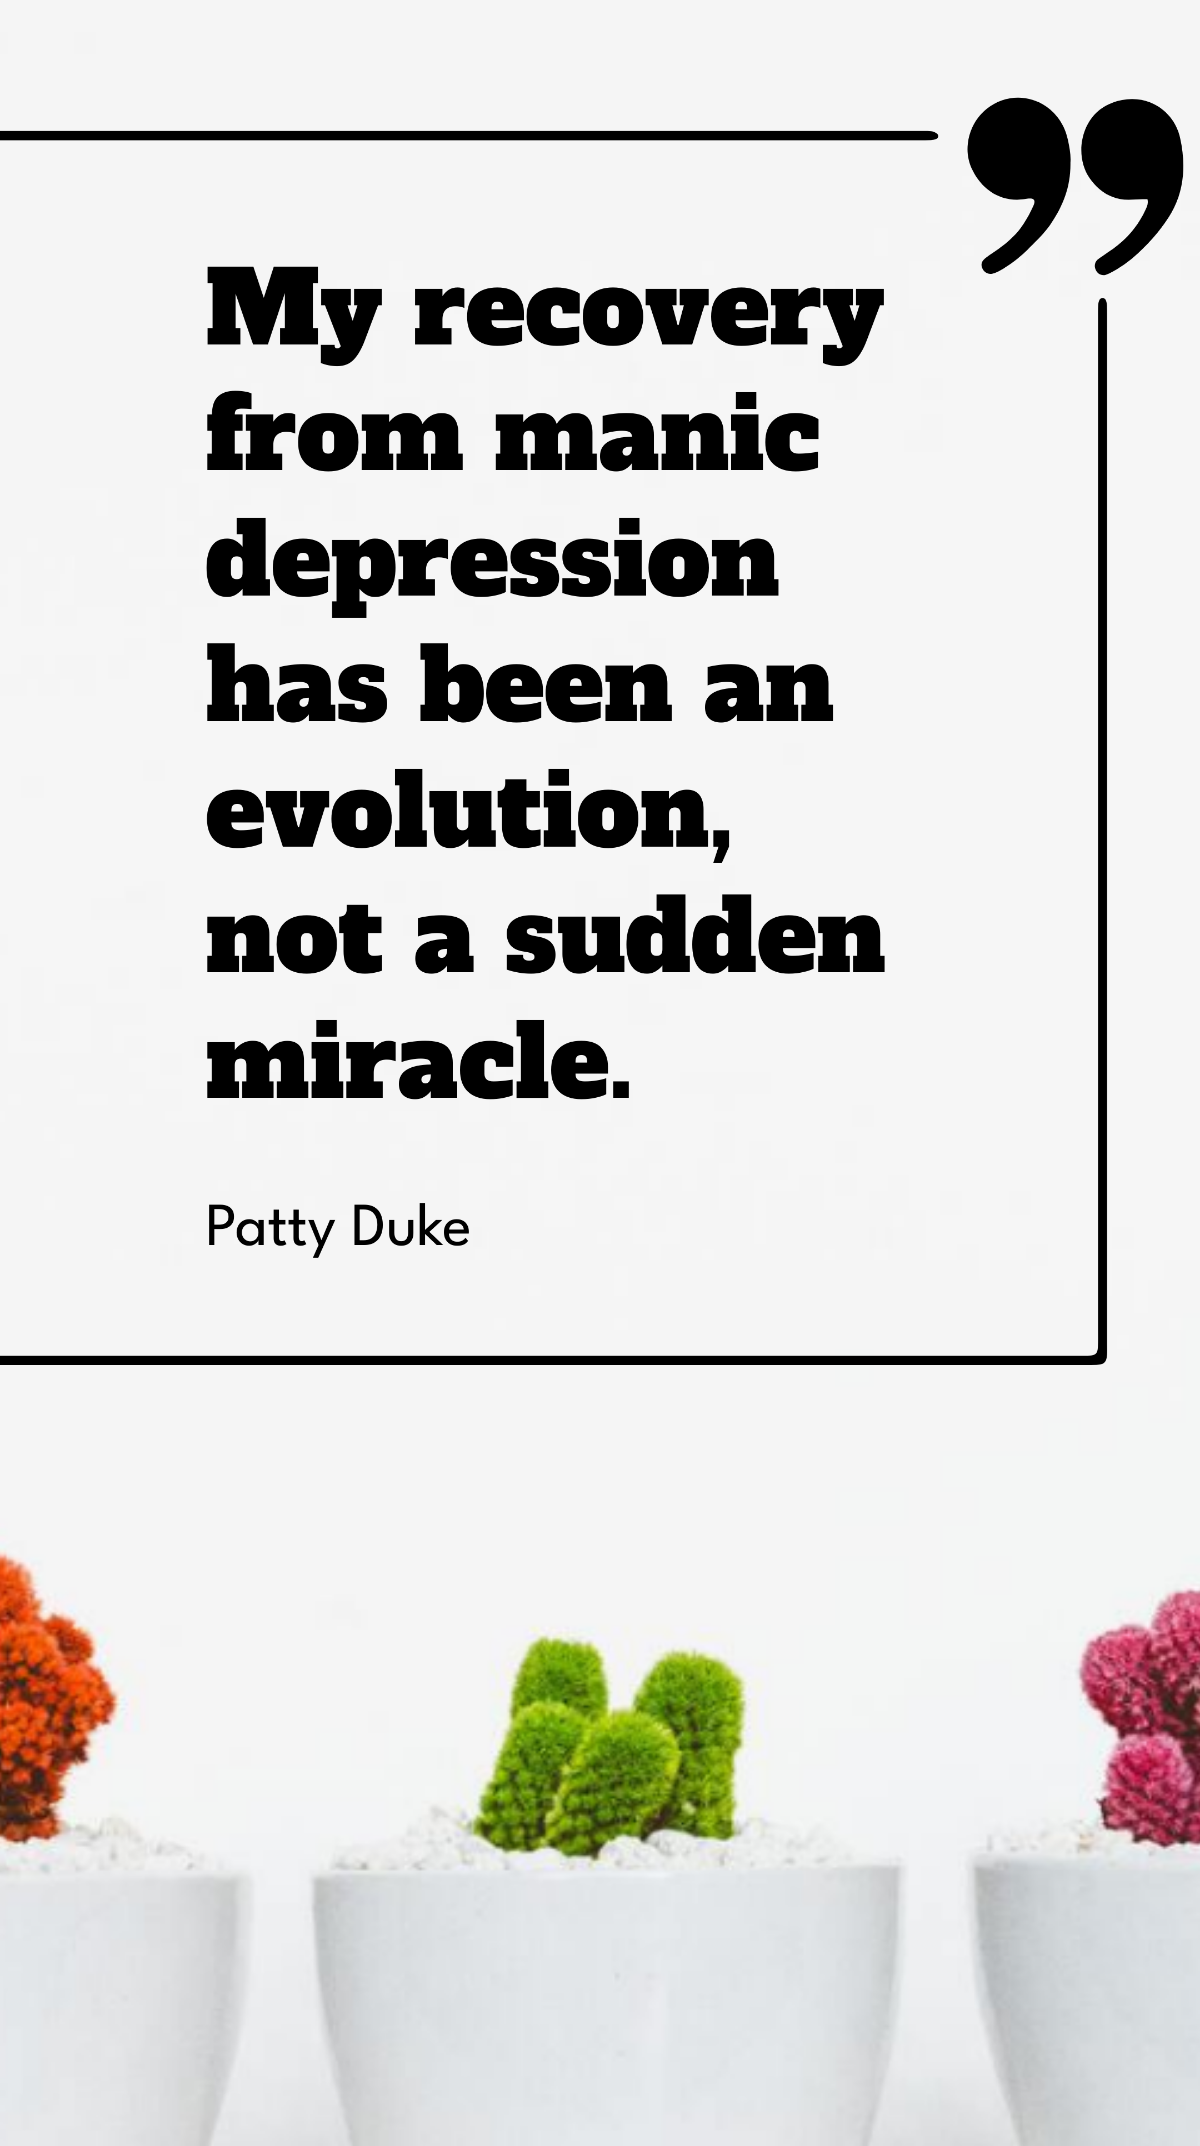 Patty Duke - My recovery from manic depression has been an evolution, not a sudden miracle. Template